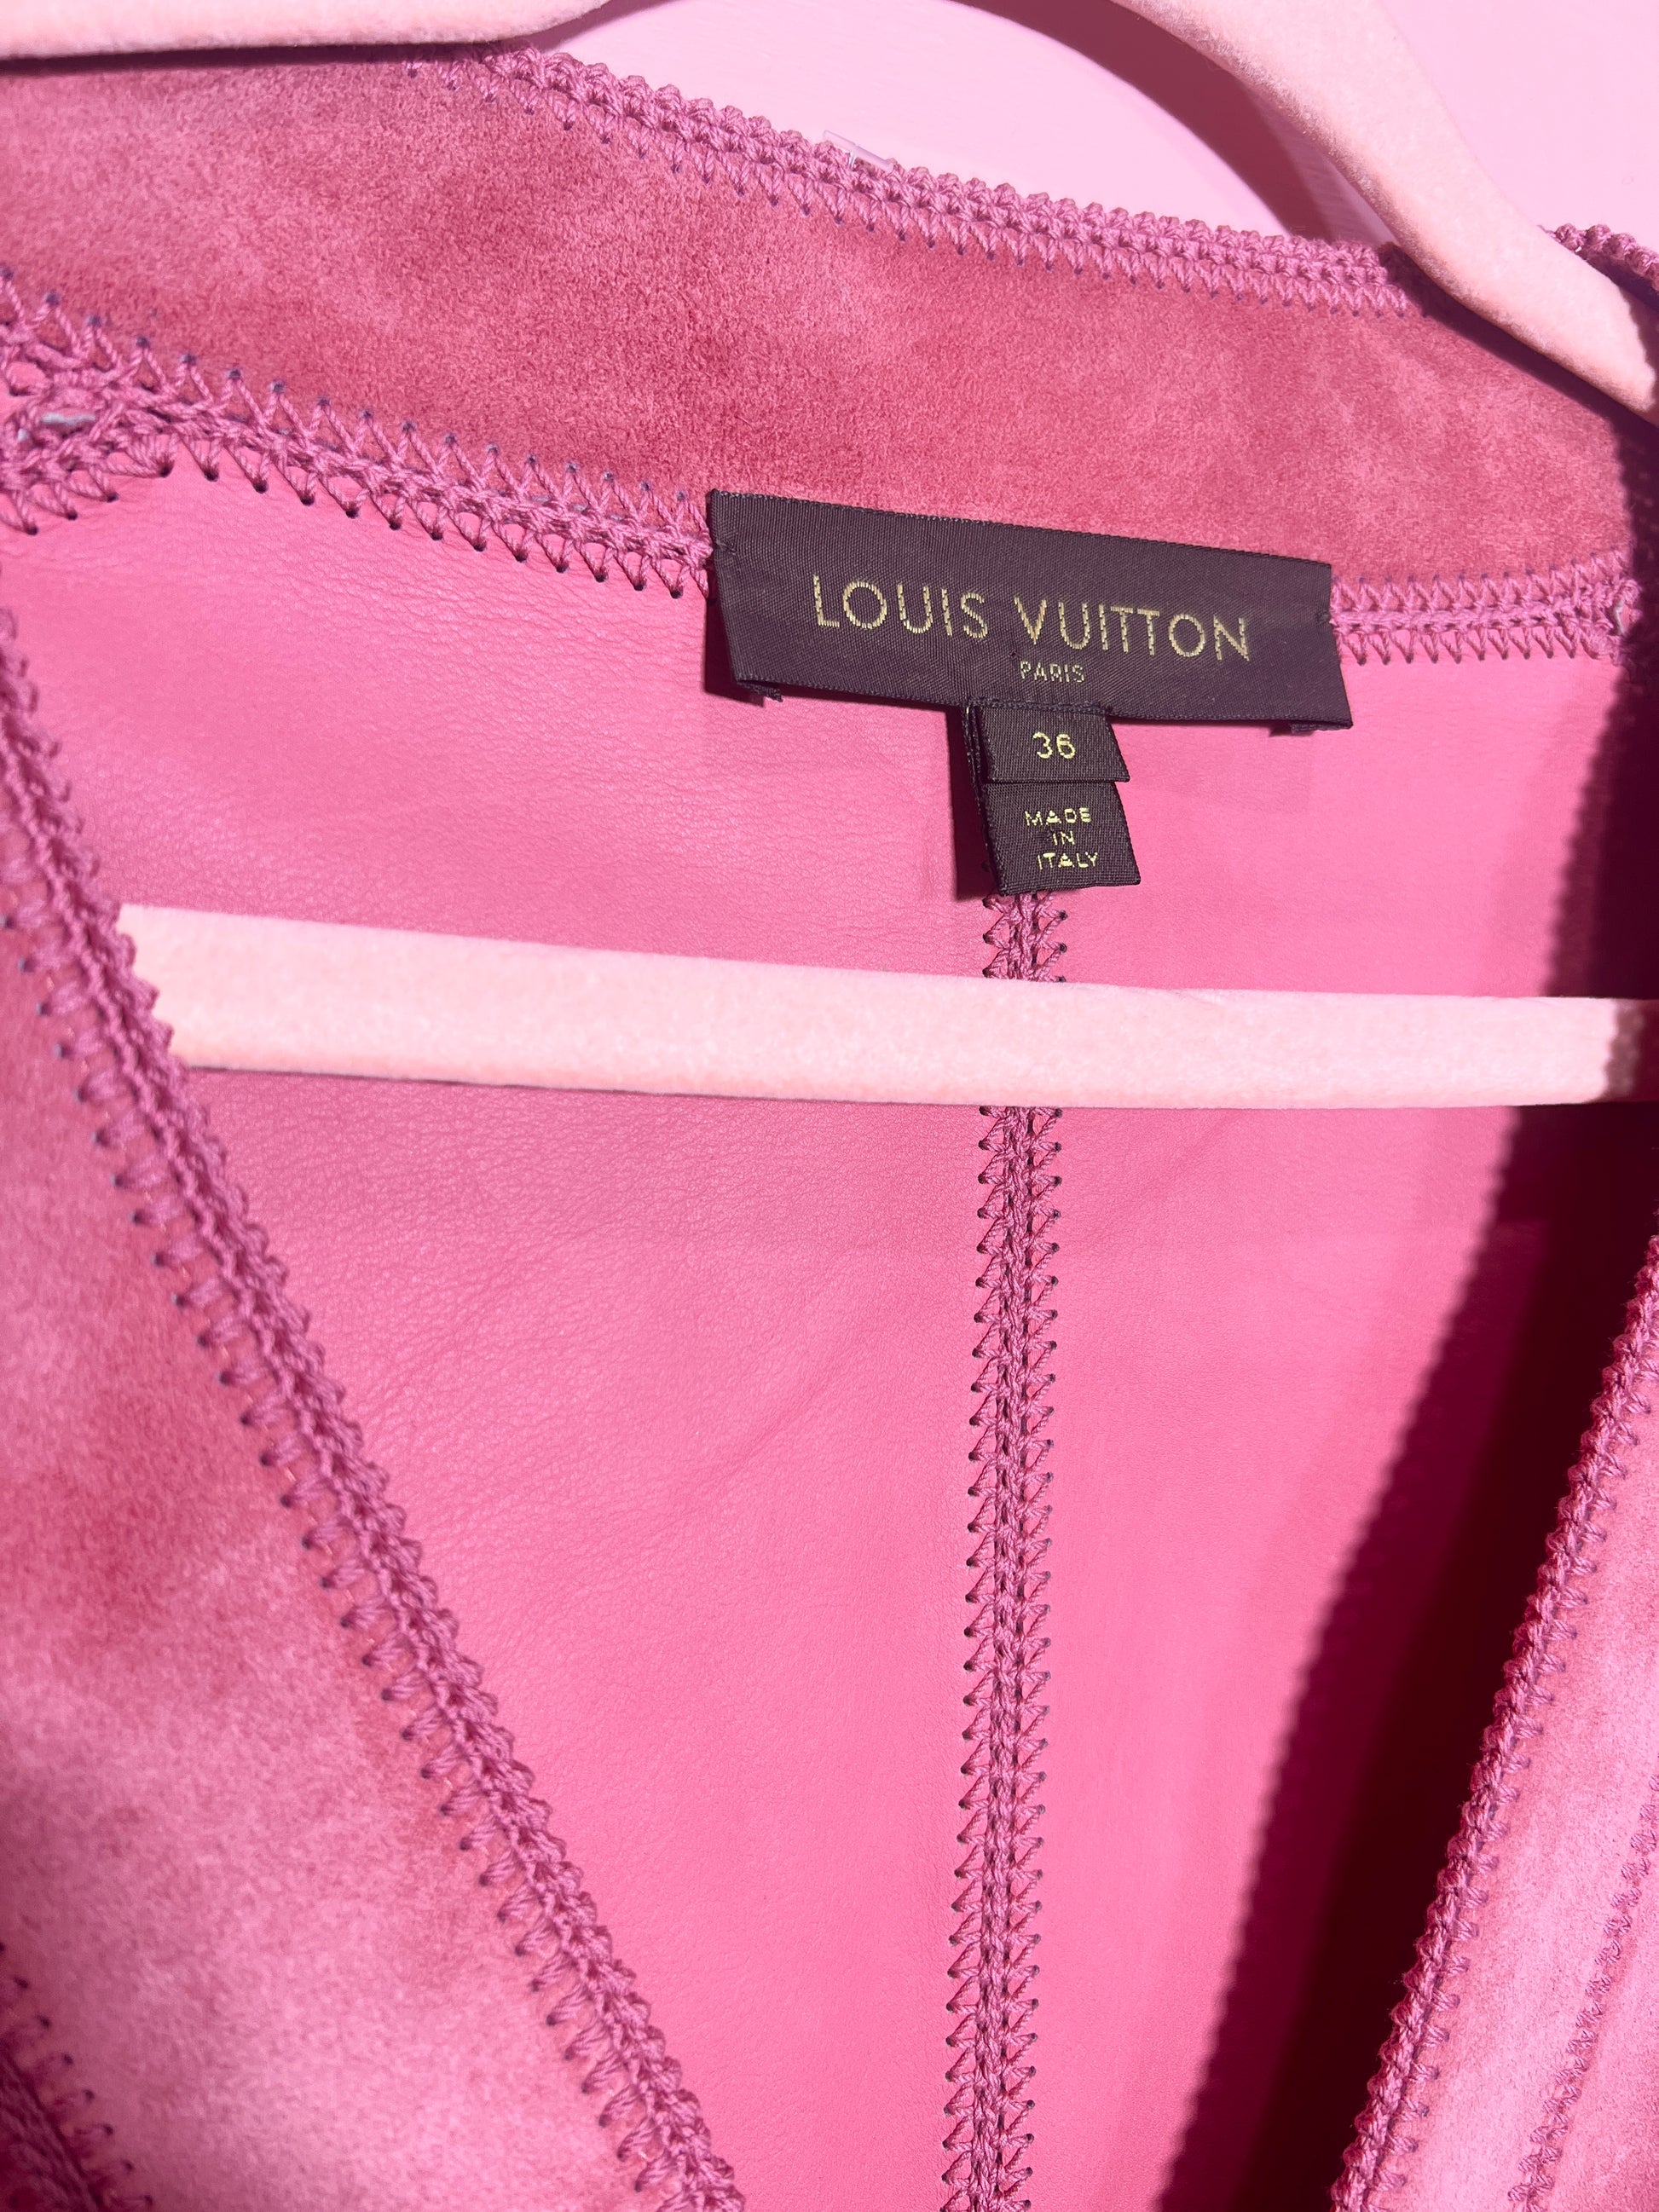 LOUIS VUITTON Half Coat 38 Pink Authentic Women Used from Japan